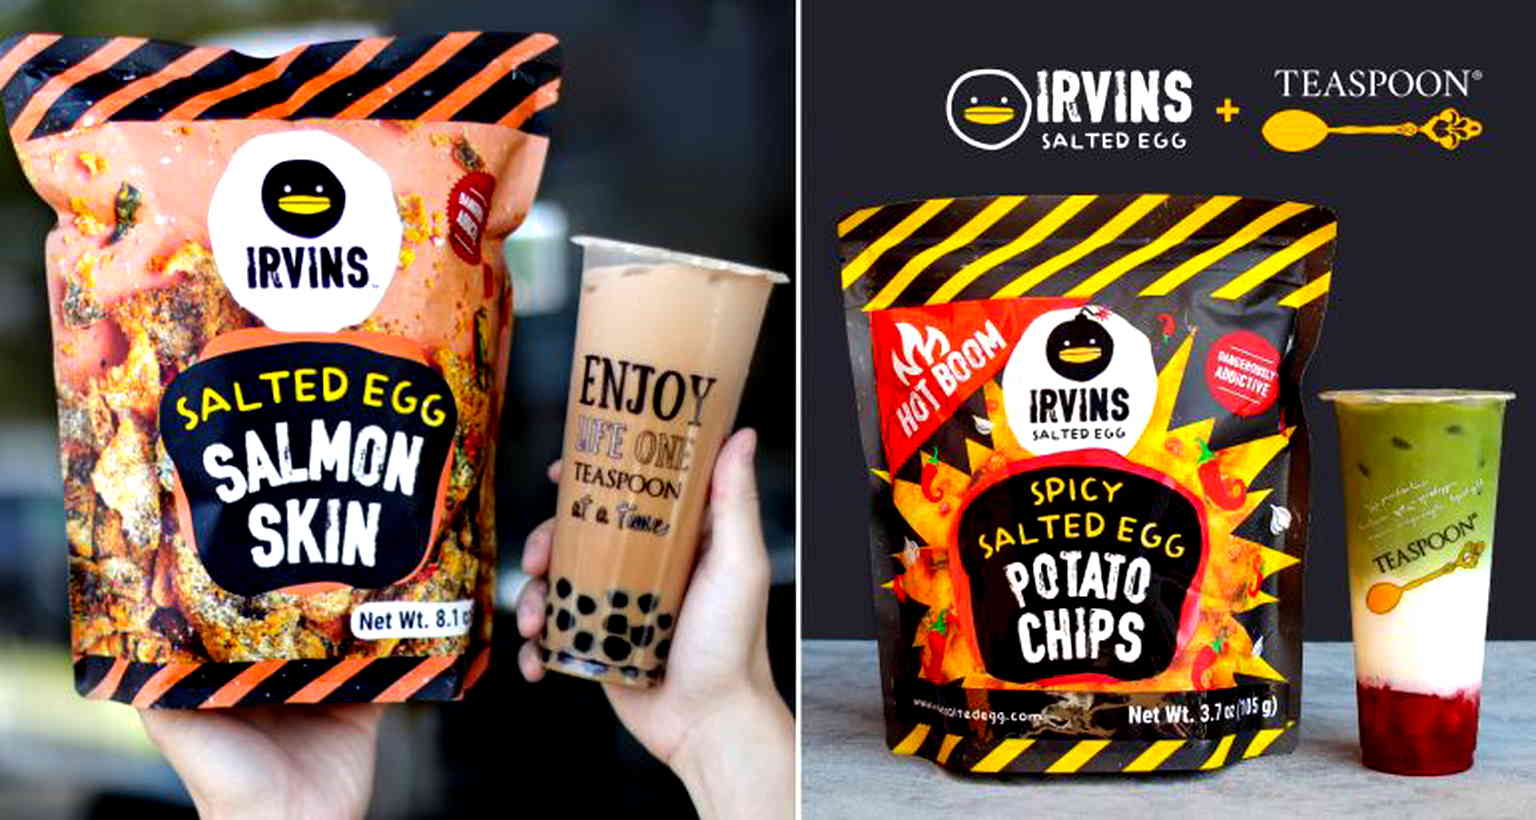 Irvins Salted Egg Fish Skin Snacks are Coming to NorCal for a LIMITED TIME